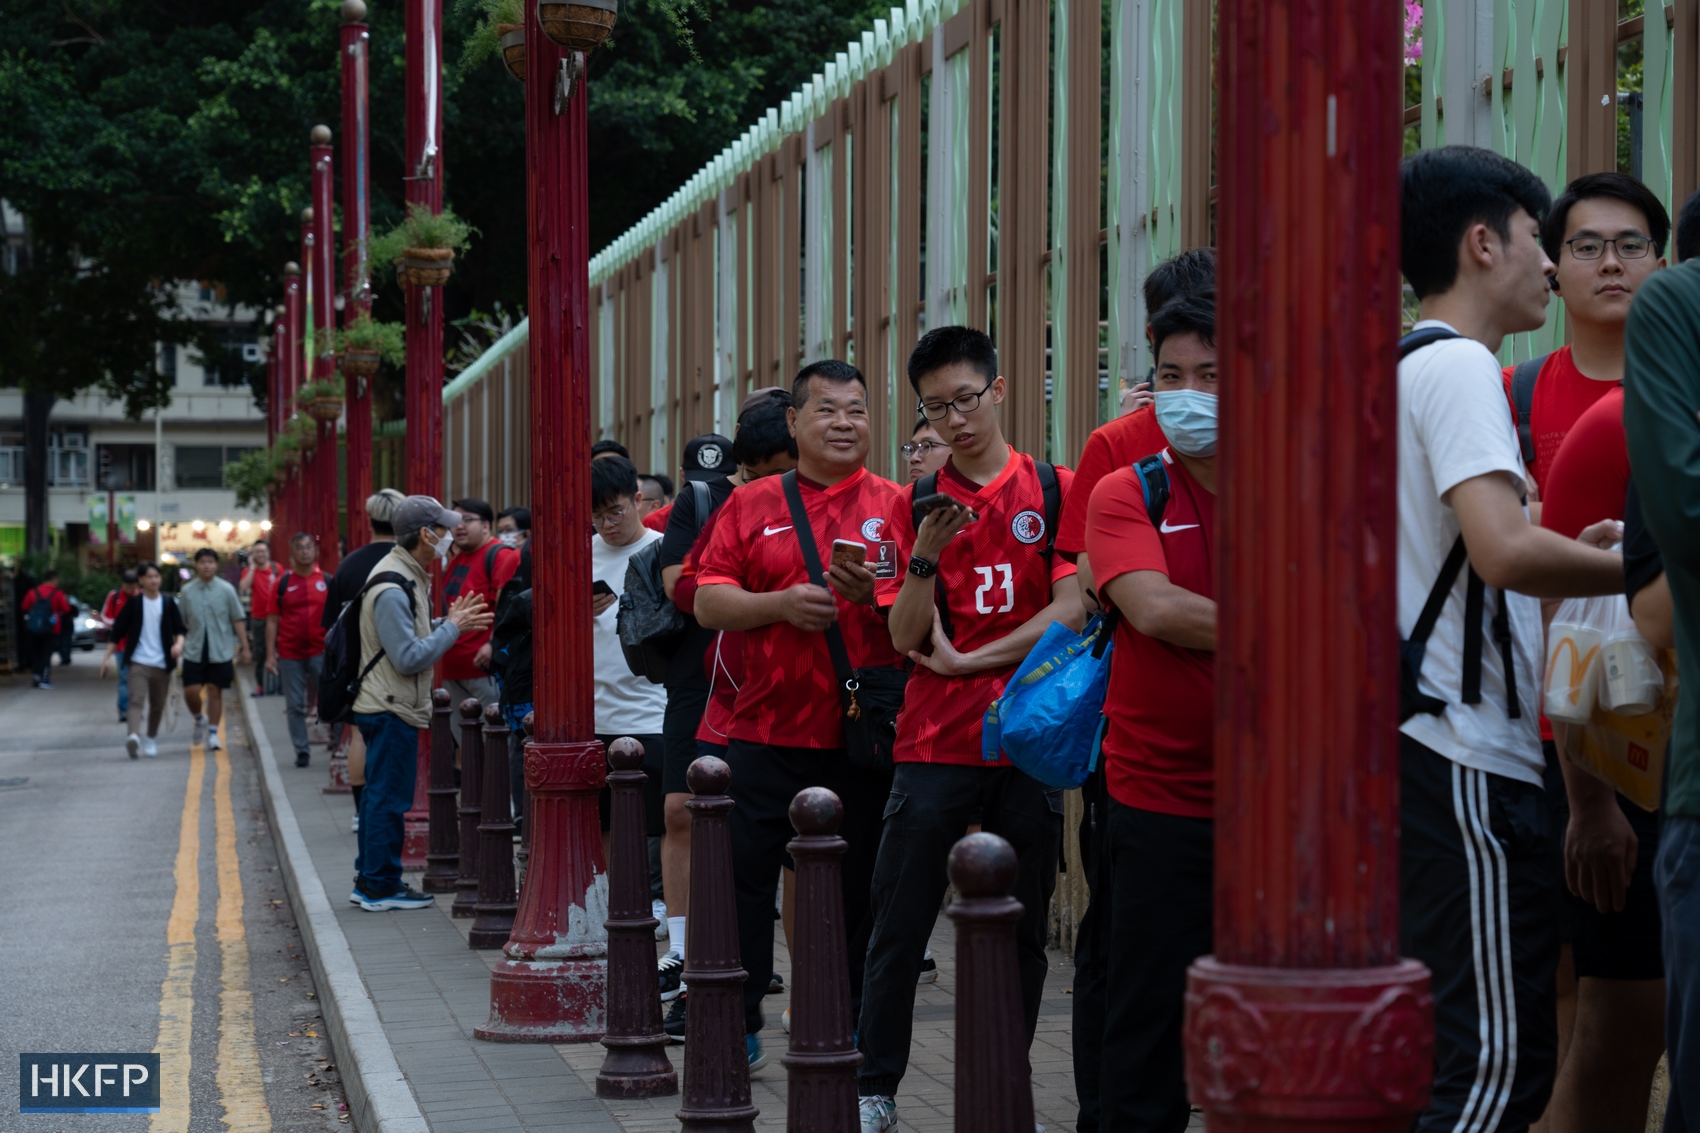 Fans queuing outside the Mong Kok Stadium for an international friendly football match between Hong Kong and Singapore on March 23, 2023.